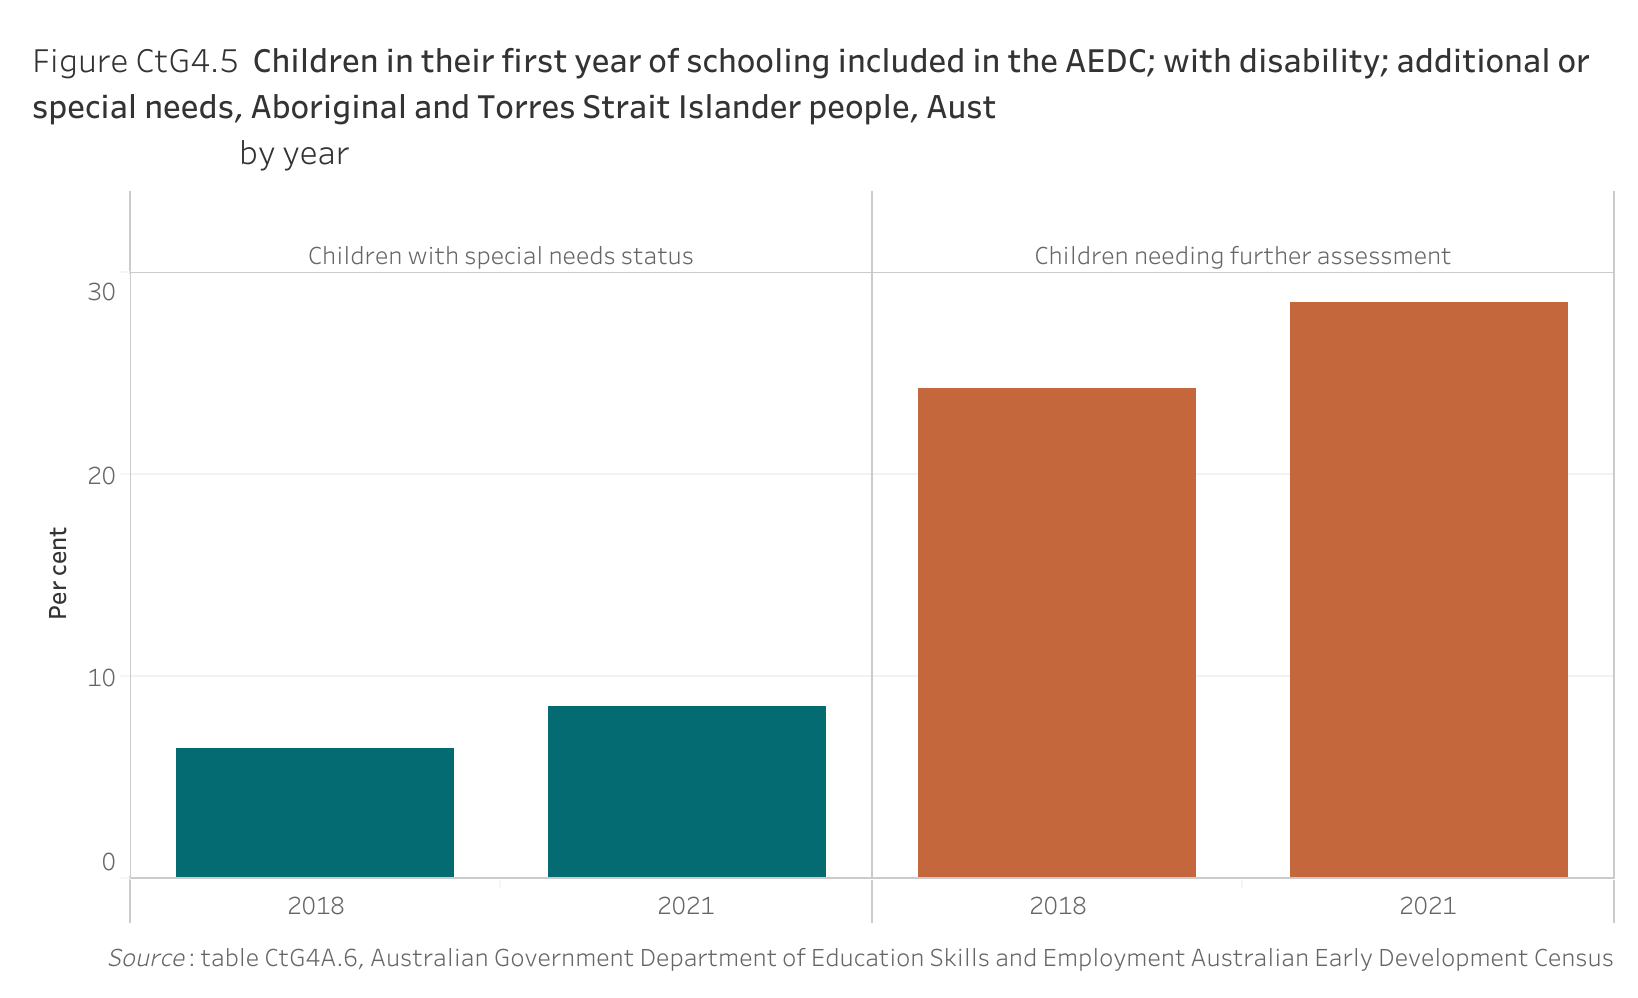 Figure CtG4.5 shows children in their first year of schooling included in the Australian Early Development Census; with disability; additional or special needs, Aboriginal and Torres Strait Islander people, Australia, by year. More details can be found within the text near this image.